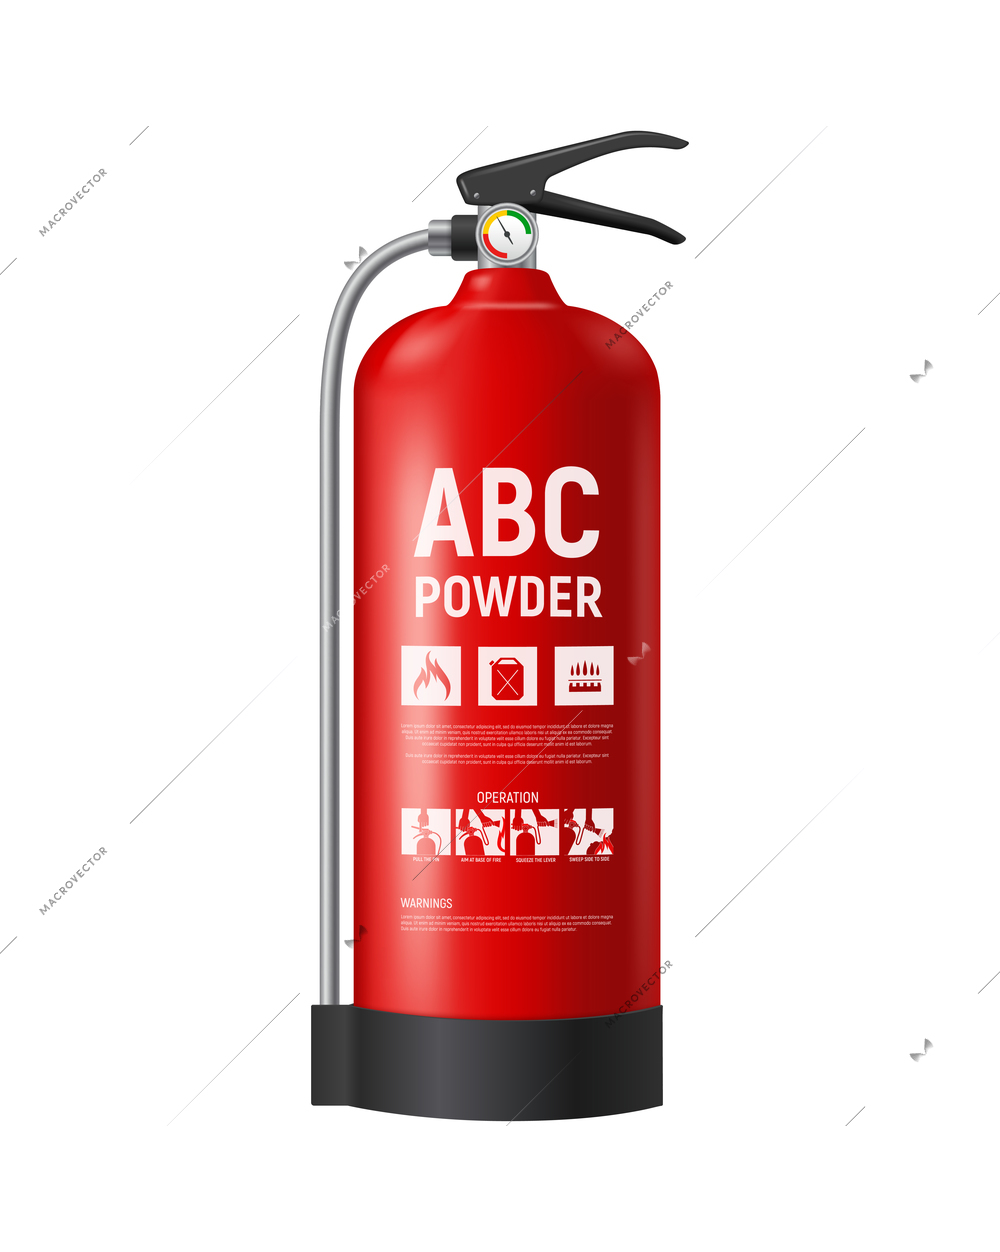 Fire extinguisher infographic composition with realistic image of fire fighting appliance vector illustration